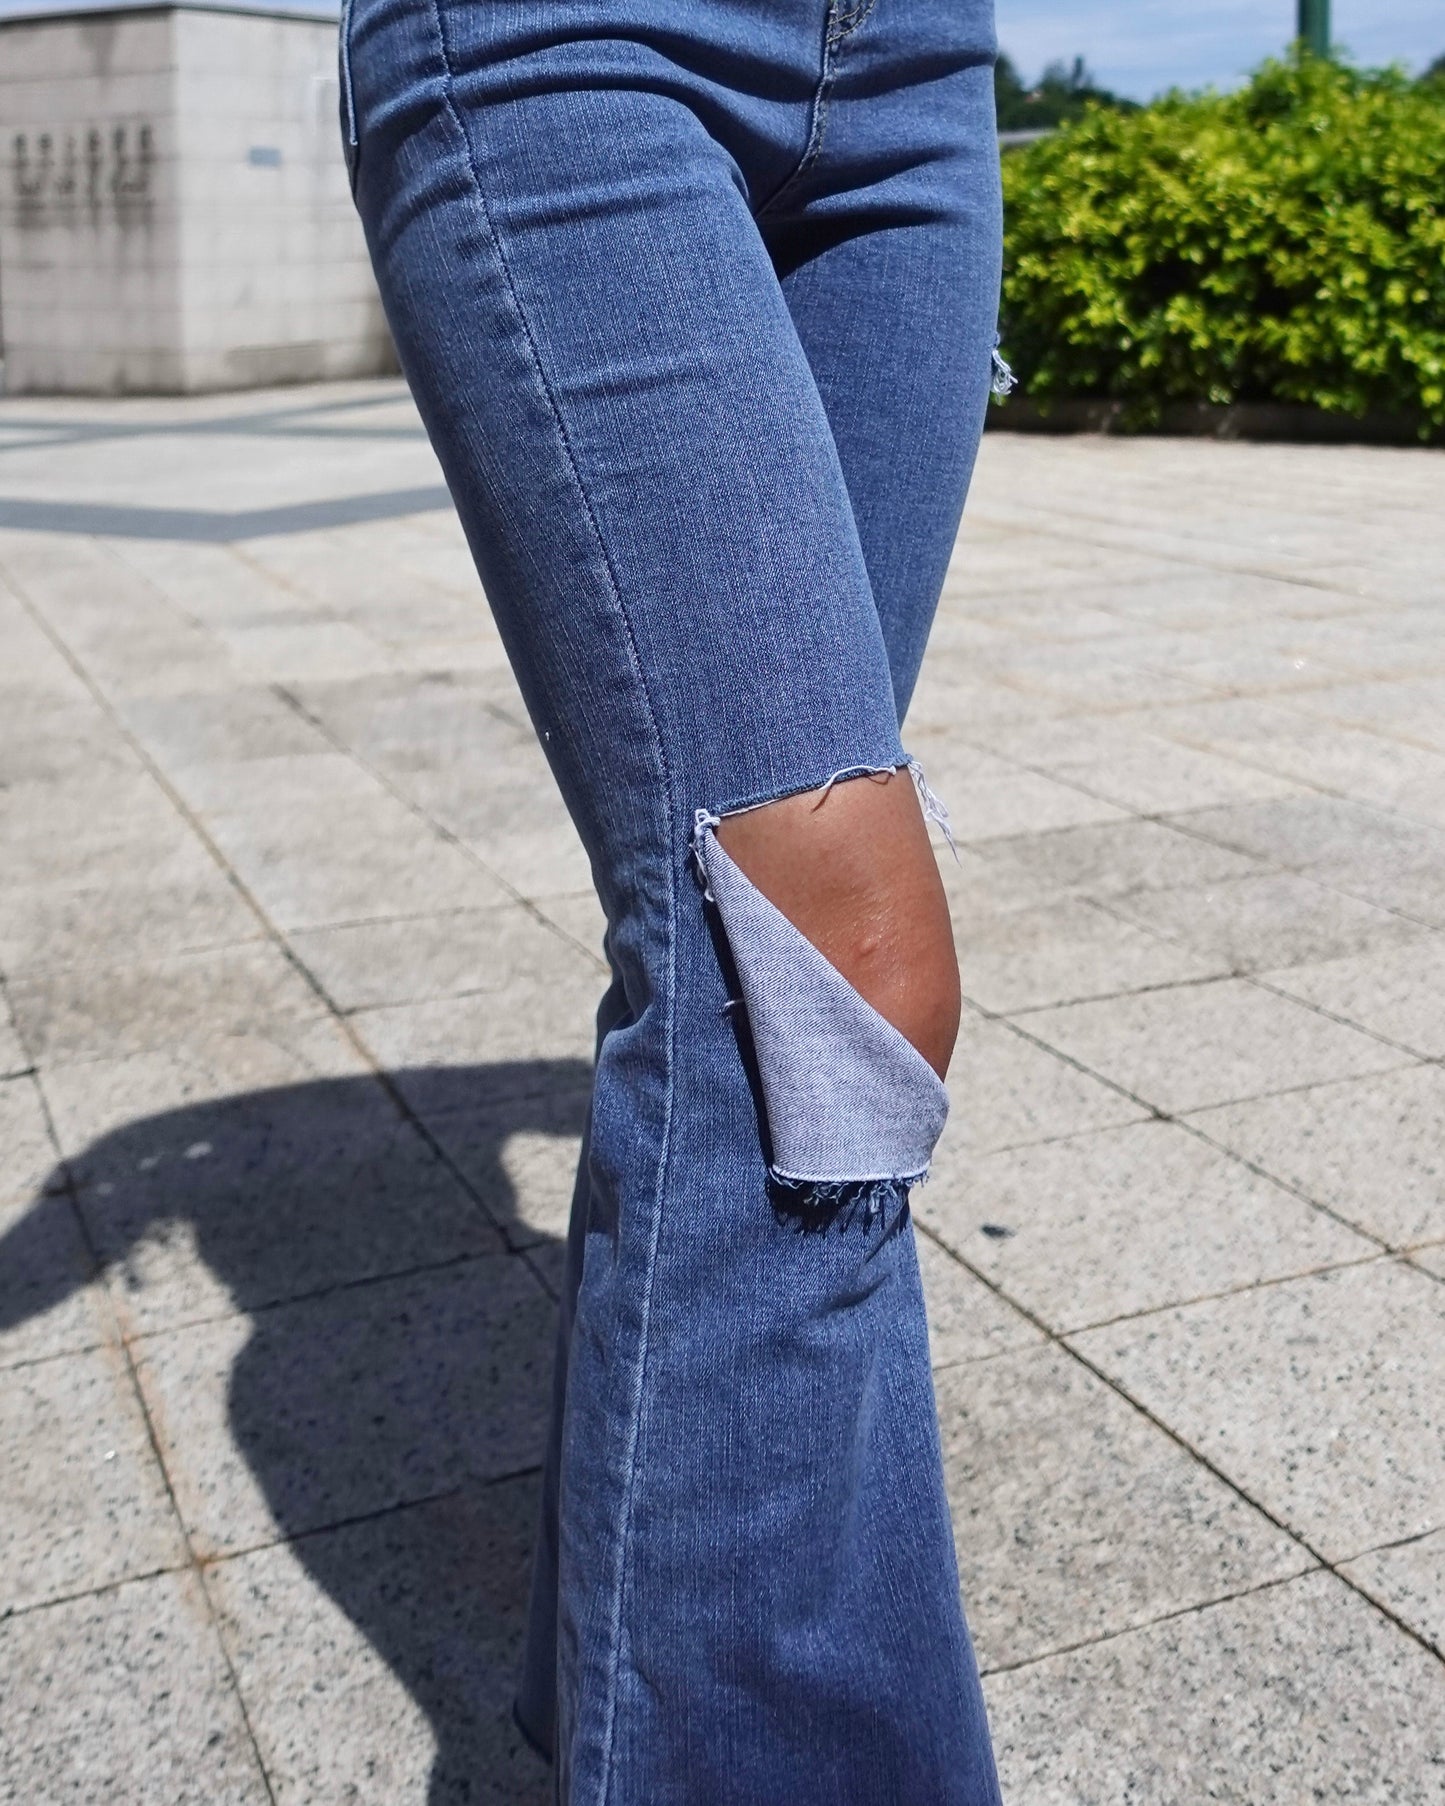 Distressed high-rise boot cut jeans